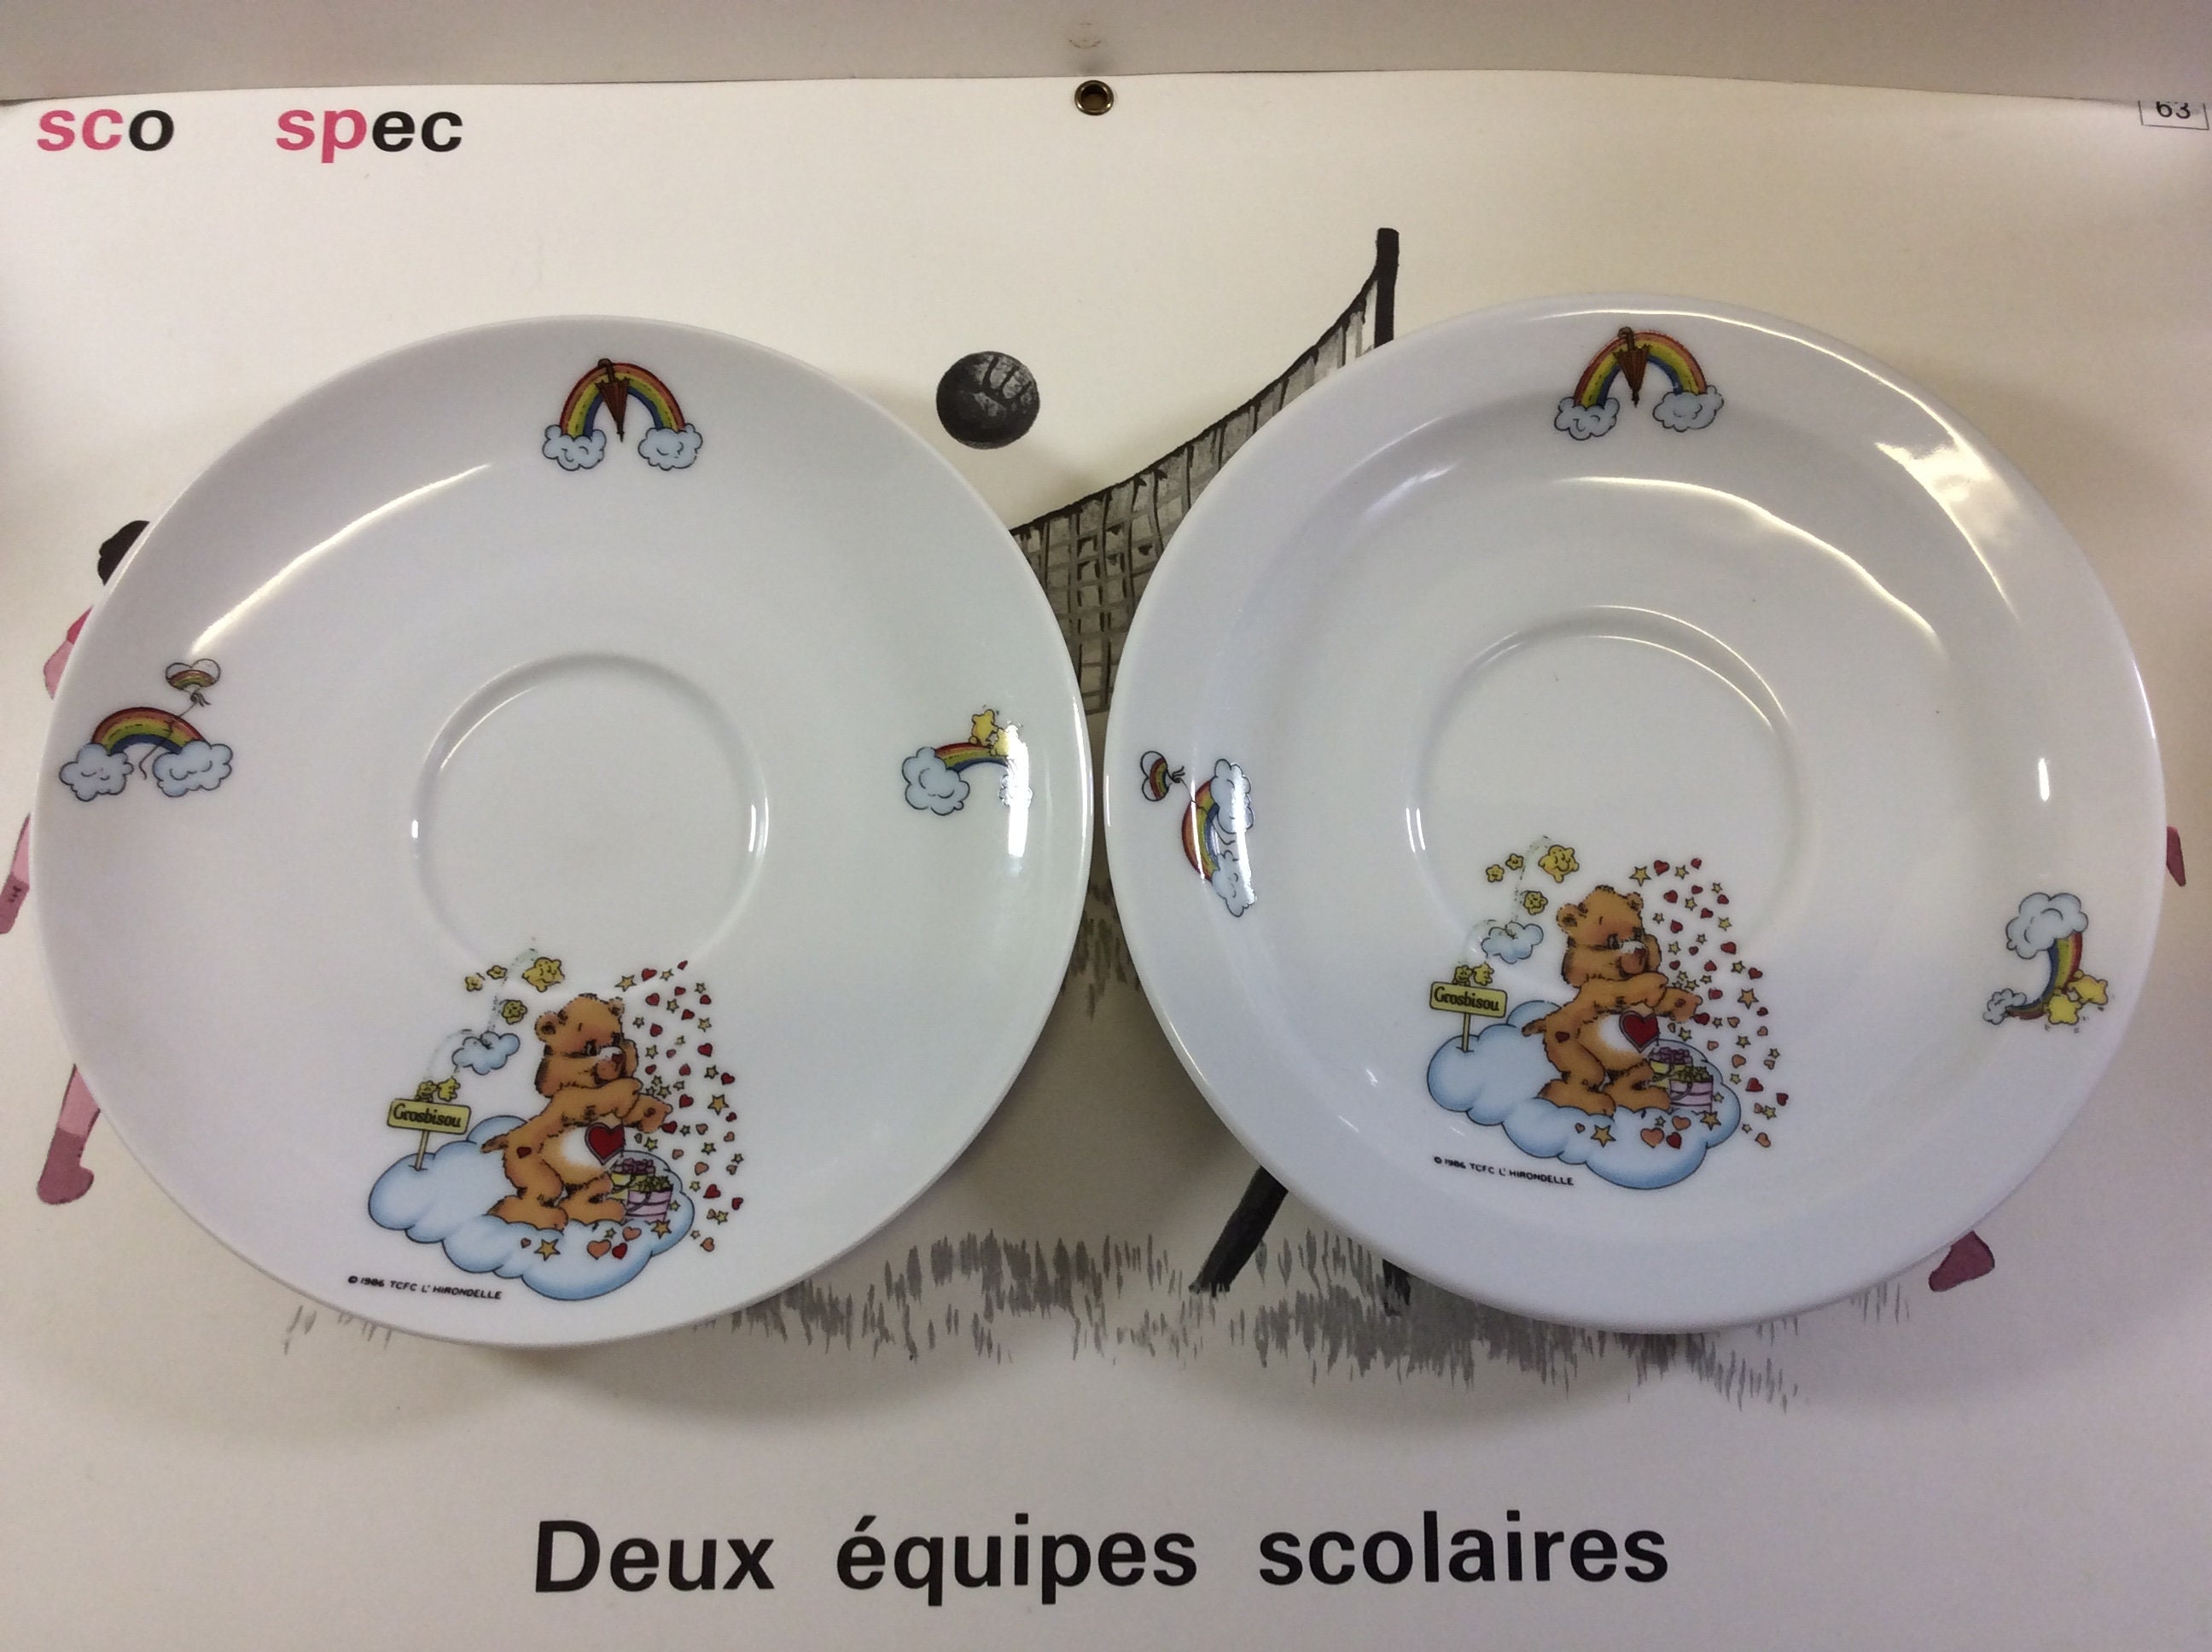 PLATE NEW CARE BEARS  DINNERWARE BOWL AND CUP  MELAMINE 